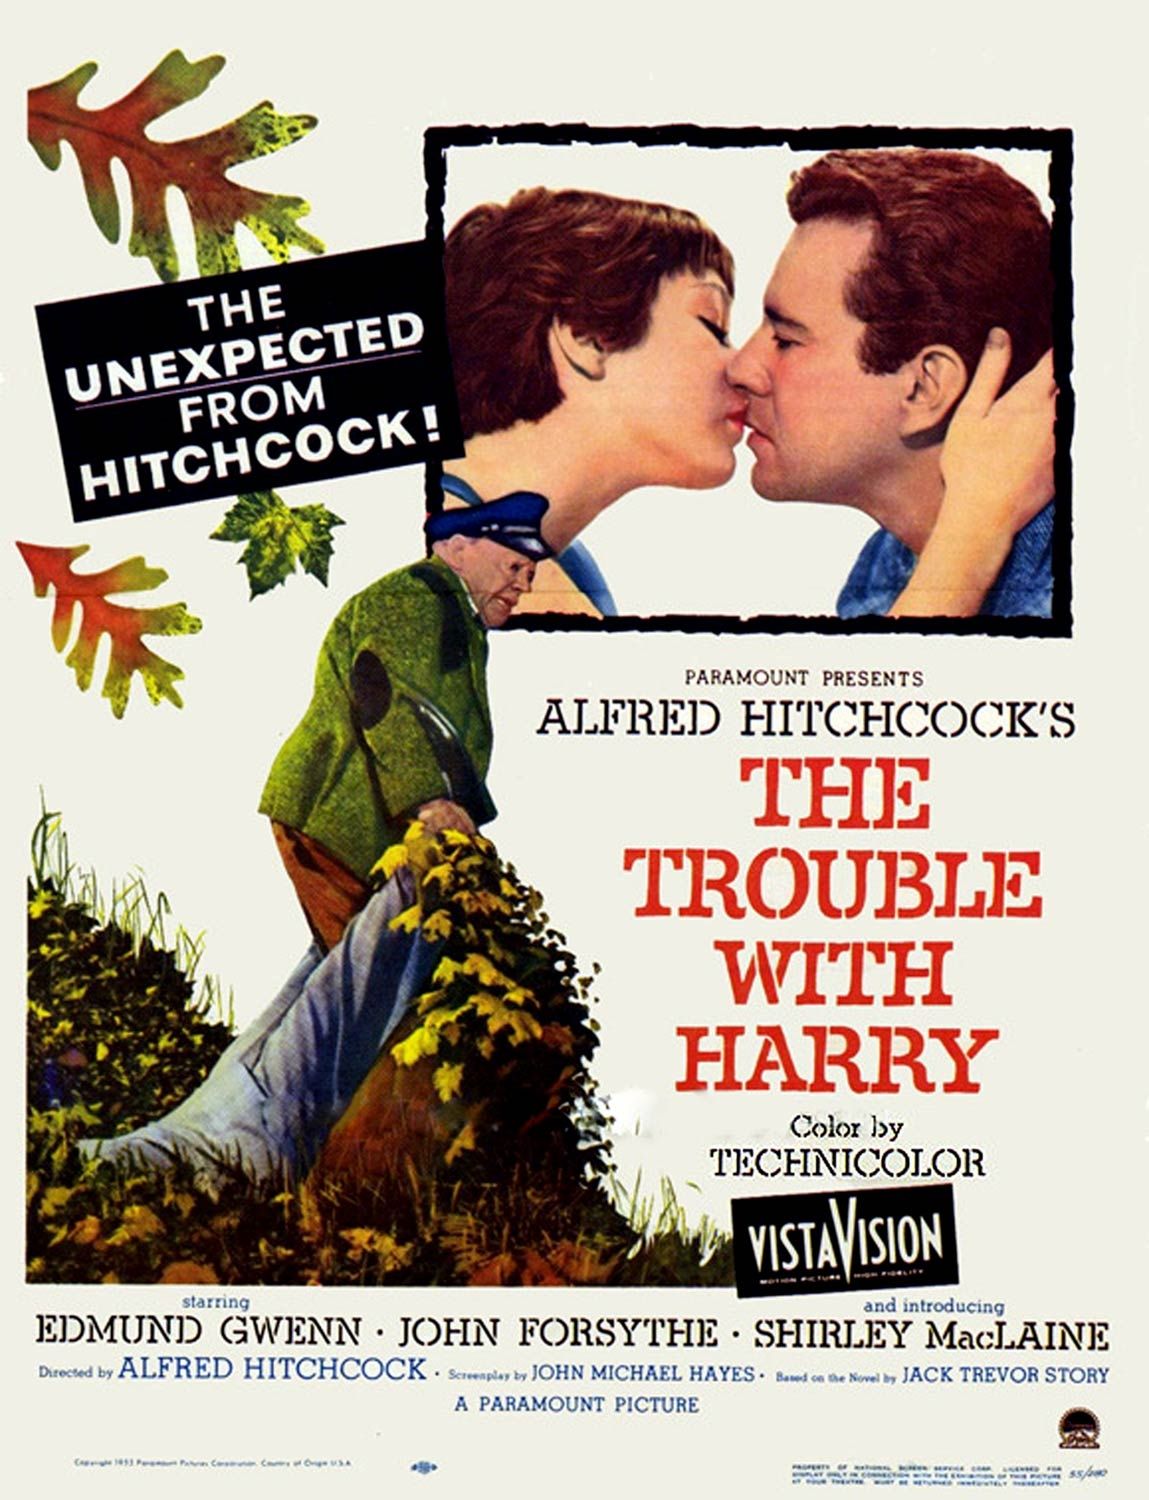 THE TROUBLE WITH HARRY (1955)